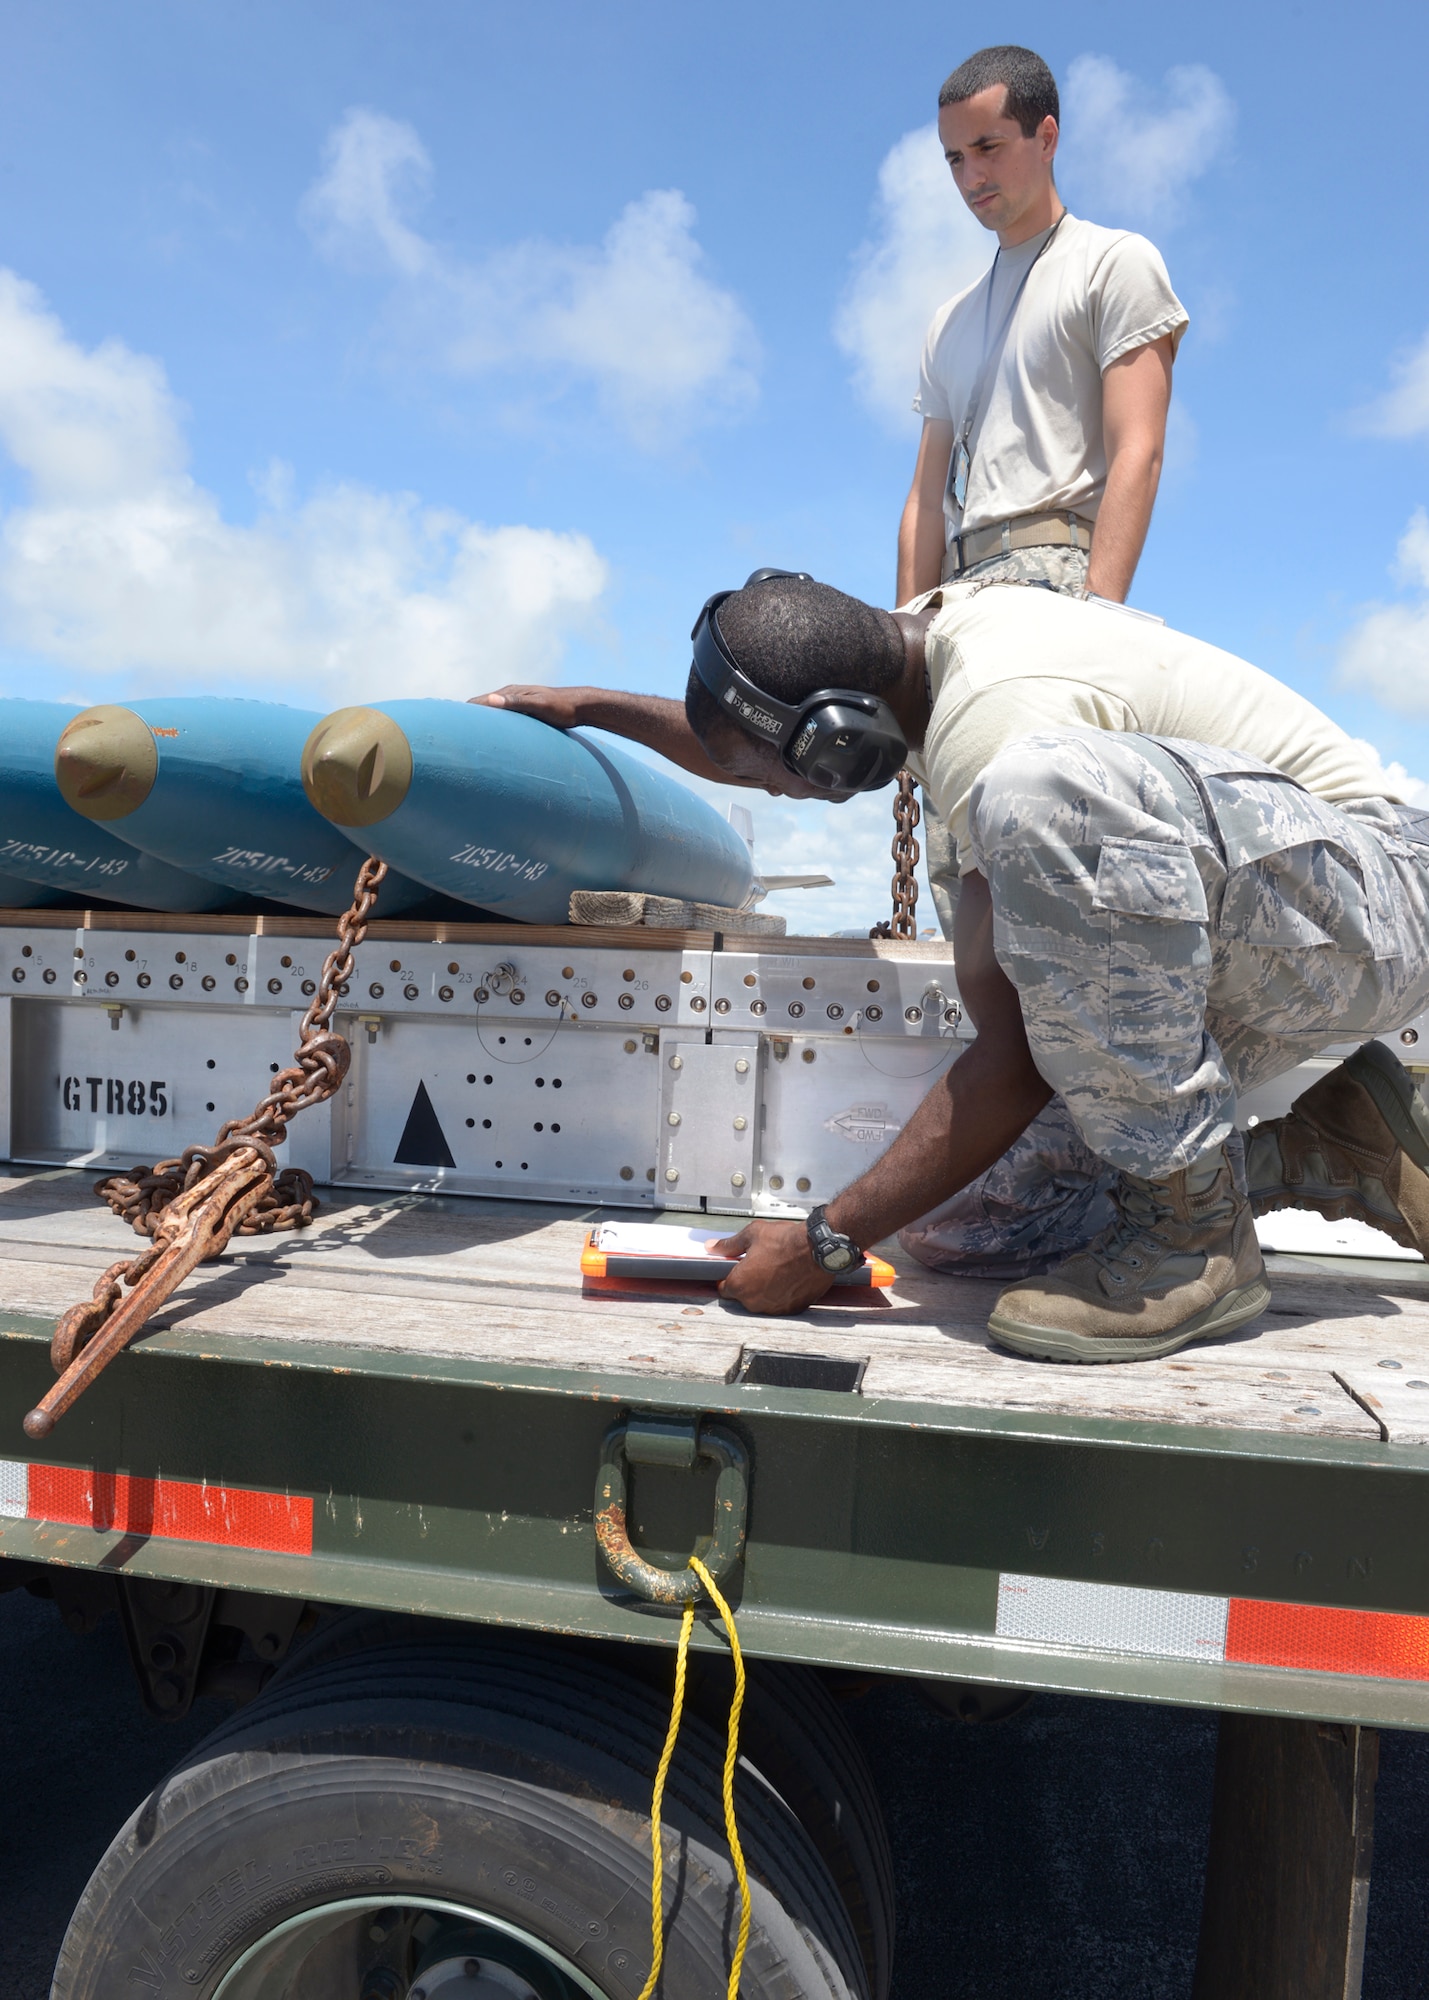 Tech. Sgt. Tyrone Garner, 36th Expeditionary Maintenance Squadron weapons expediter, checks out a Bomb Disposal Unit 50, before instructing his team to load them onto a B-1 Lancer May, 30, 2017 at Andersen Air Force Base, Guam. Depending on the mission of the Lancer, the crew may load Joint Direct Attack Munitions, Joint Air-to-Surface Standoff Missiles or when practicing, Bomb Disposal Units 50 and 56. (U.S. Air Force photo by Senior Airman Cierra Presentado/Released)